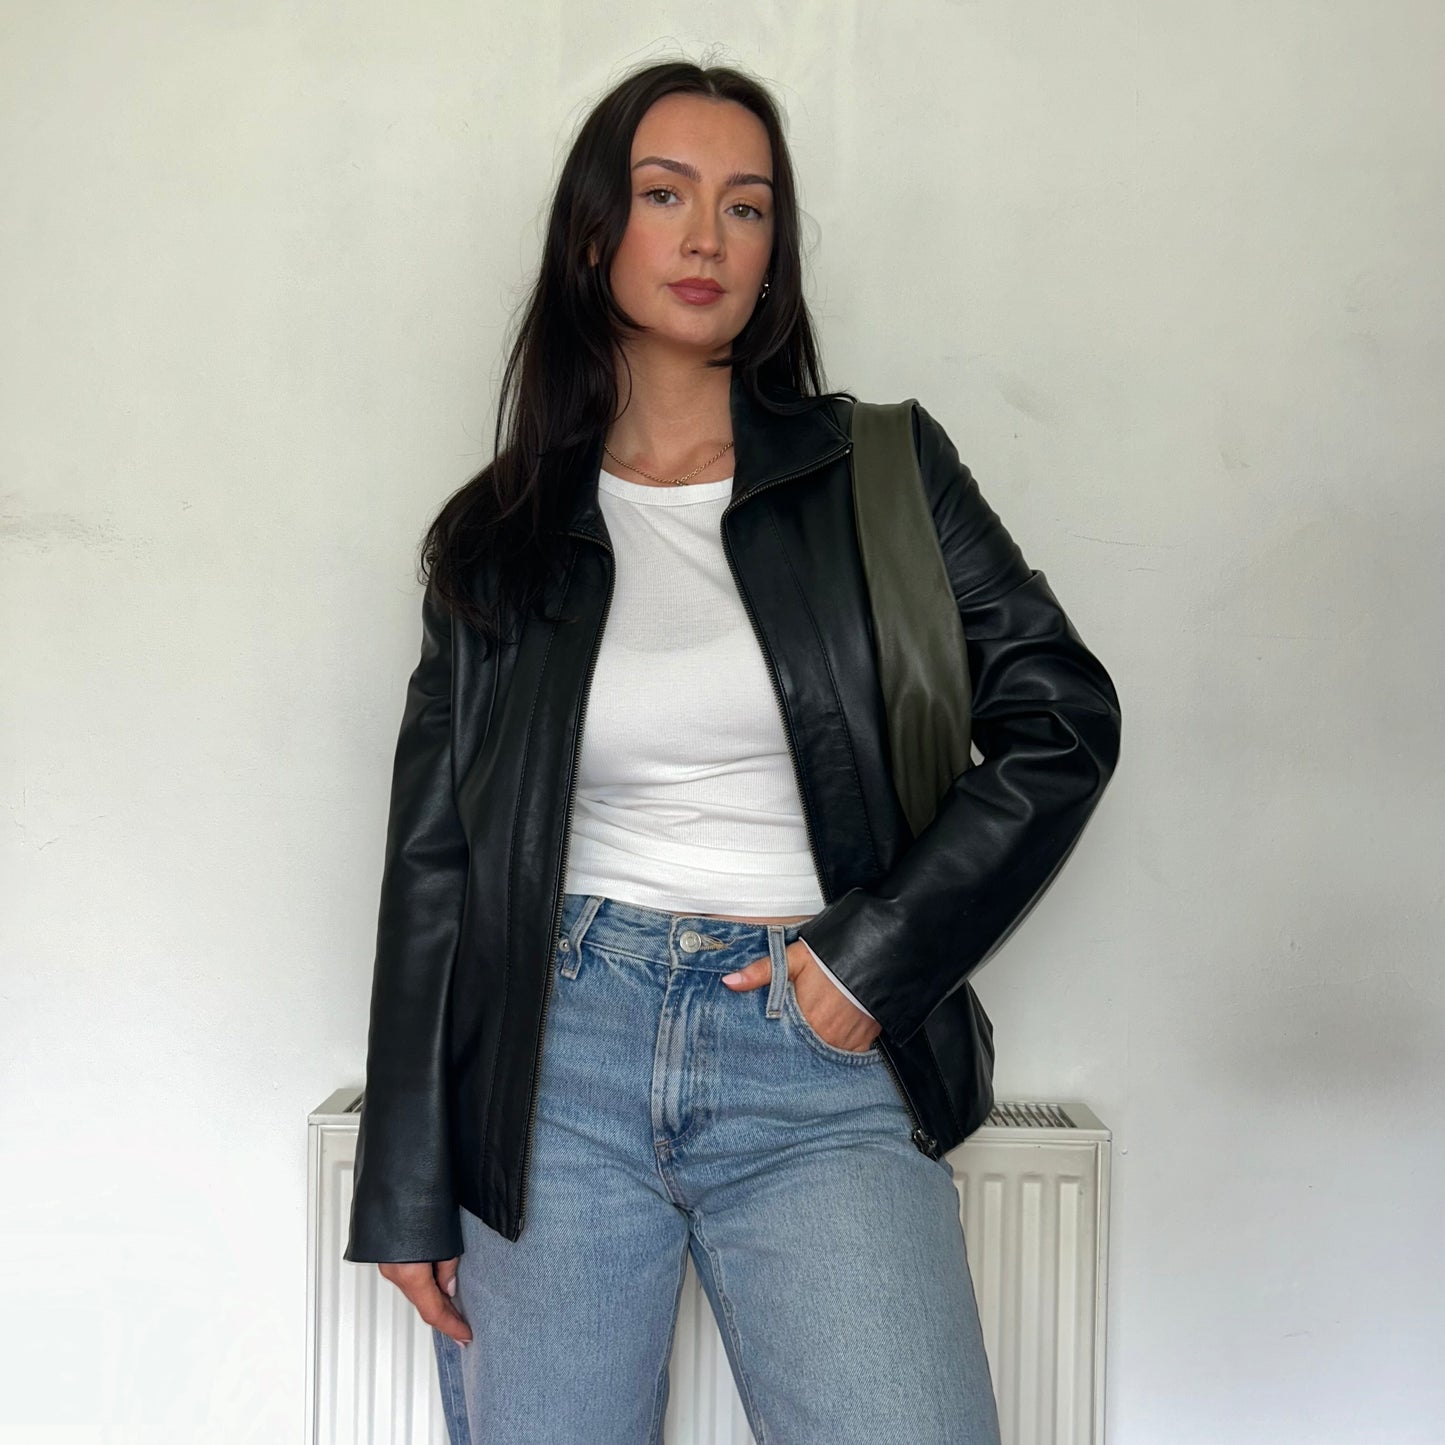 black leather bomber jacket shown on a model wearing a white top and blue jeans with a green bag